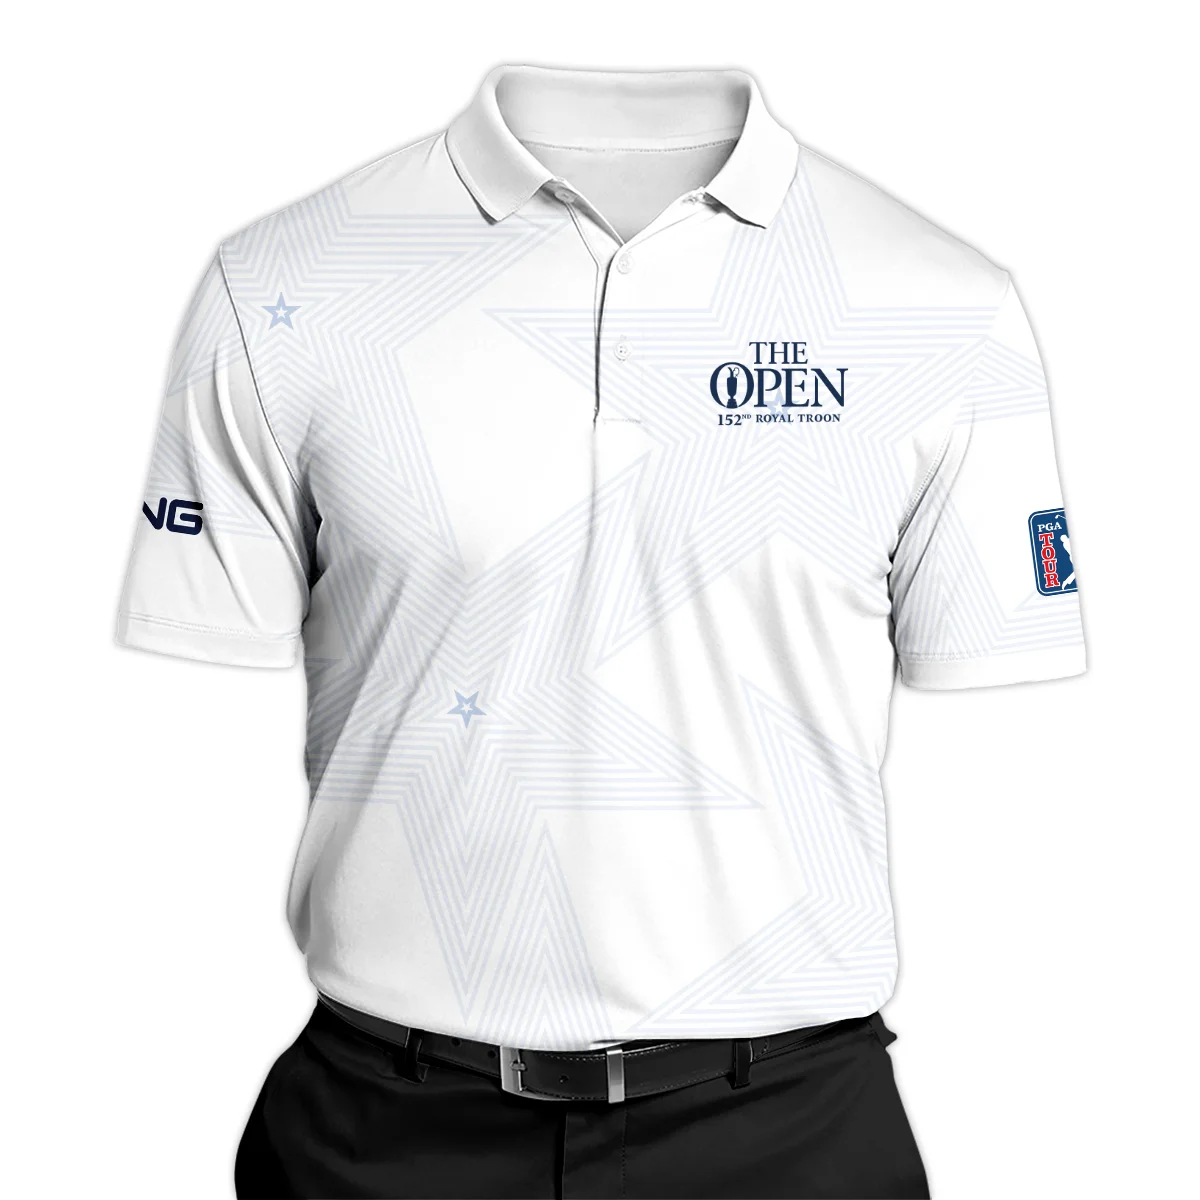 The 152nd Open Championship Golf Sport Ping Polo Shirt Sports Star Sripe White Navy Polo Shirt For Men